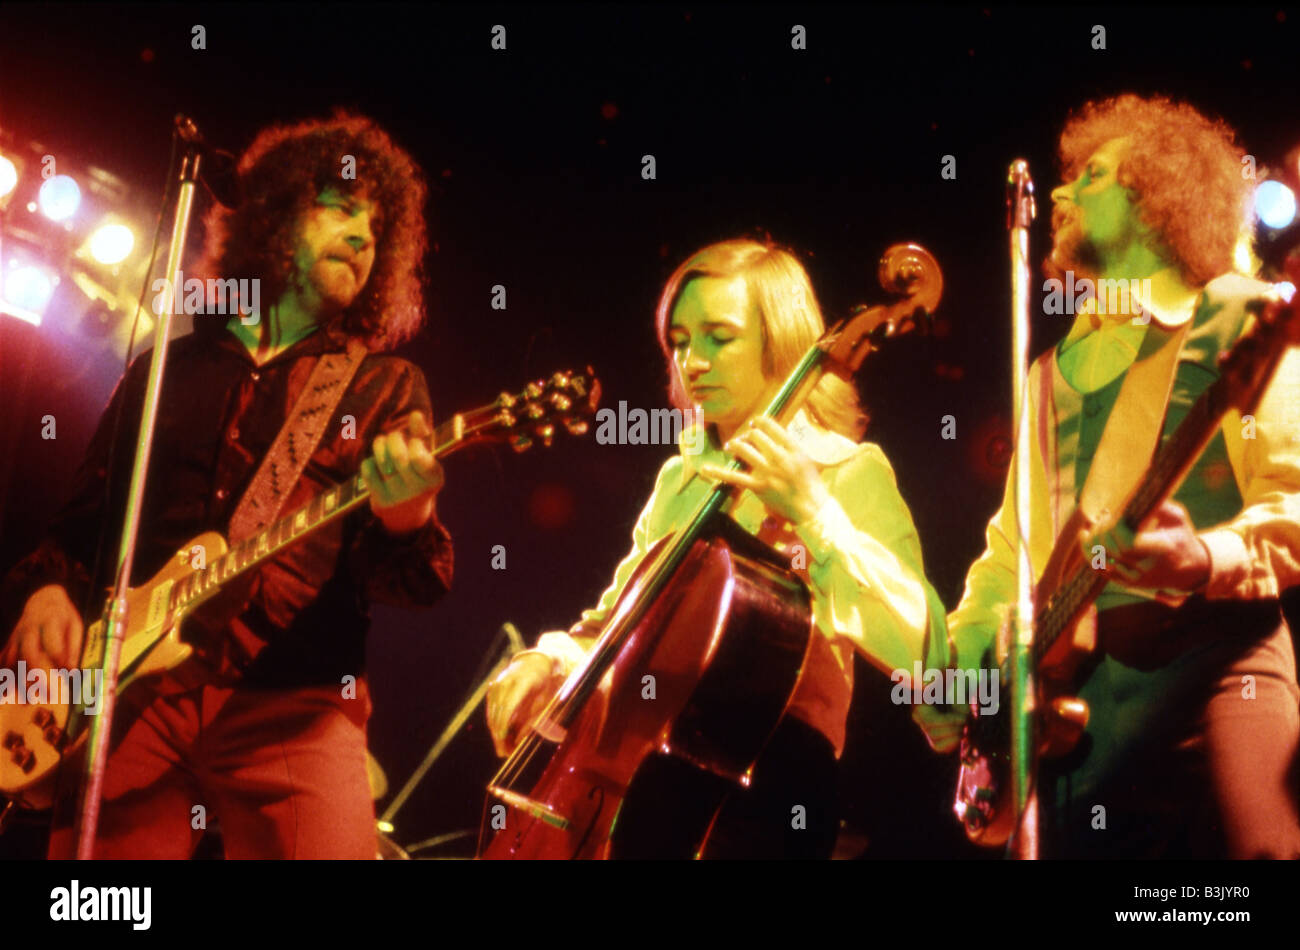 ELECTRIC LIGHT ORCHESTRA (ELO) UK rock group about 1977 with Jeff Lynne at left Stock Photo